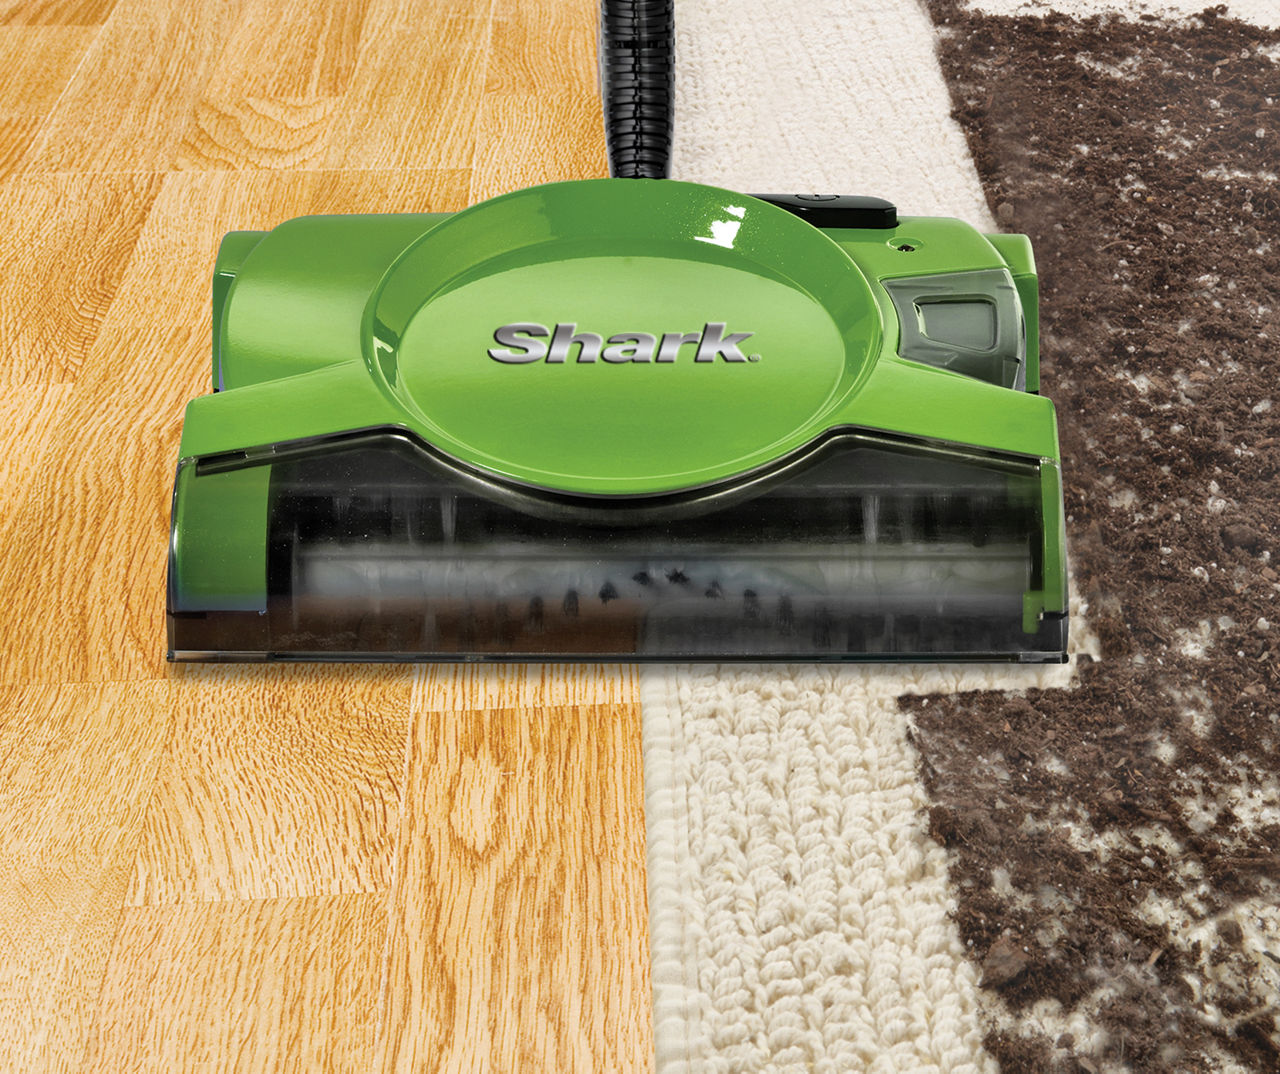 Eco Friendly Electric Cordless Rechargeable Floor Sweeper Cleaning